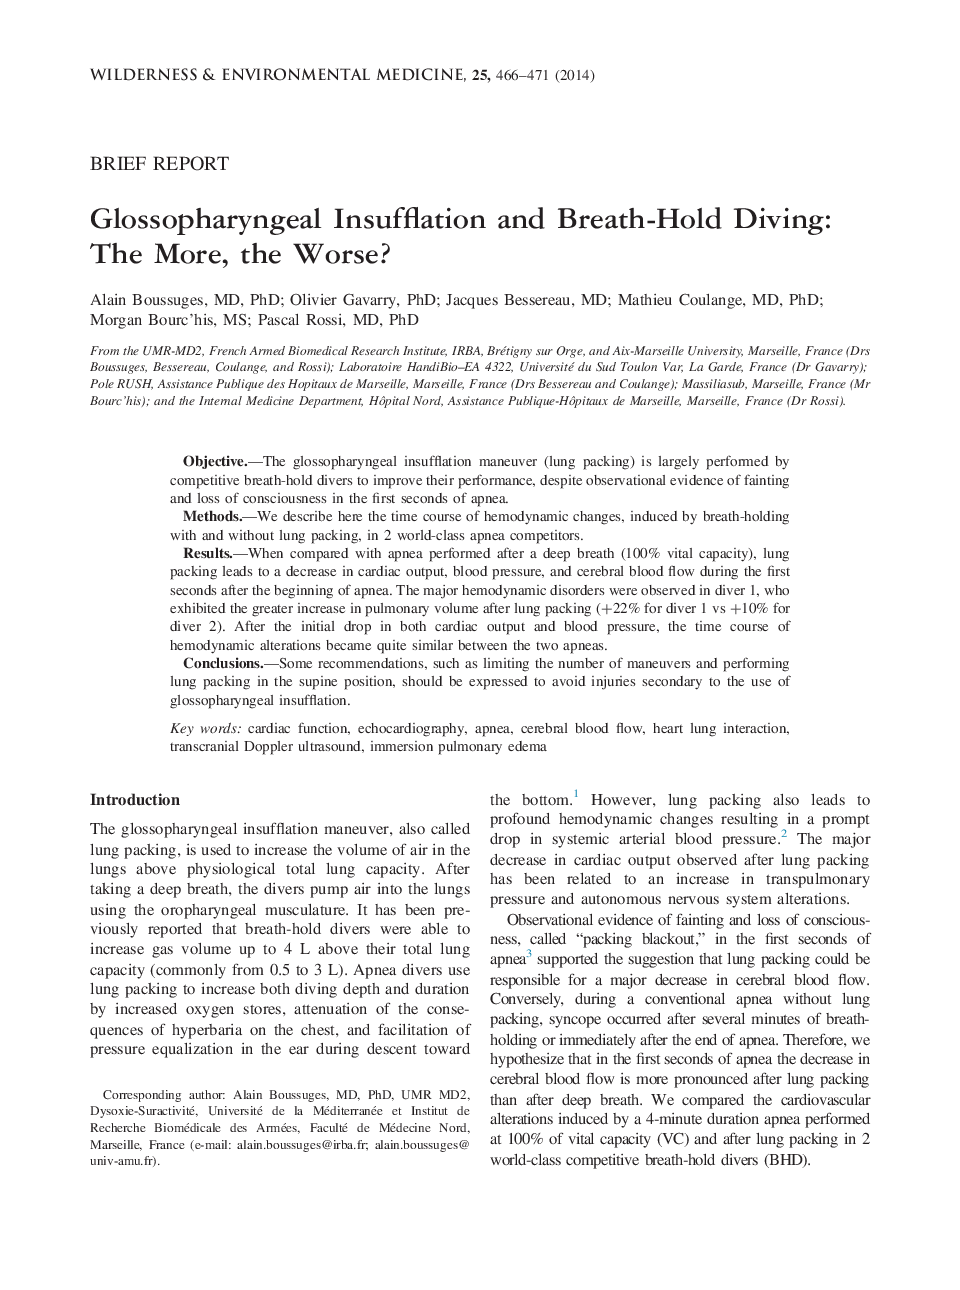 Glossopharyngeal Insufflation and Breath-Hold Diving: The More, the Worse?